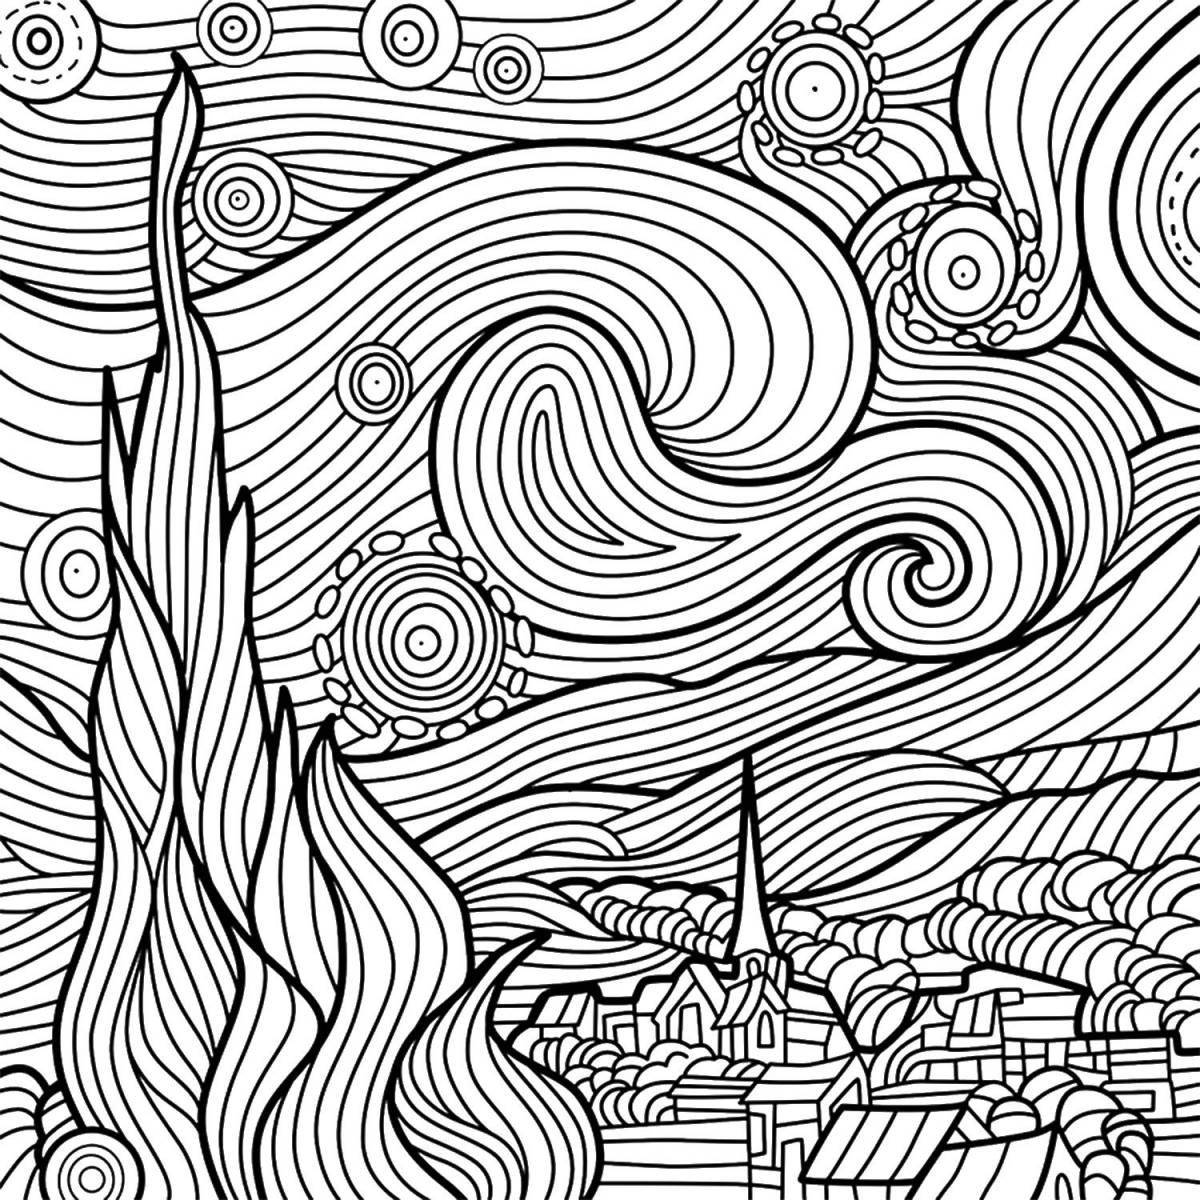 Imaginary nerve coloring page